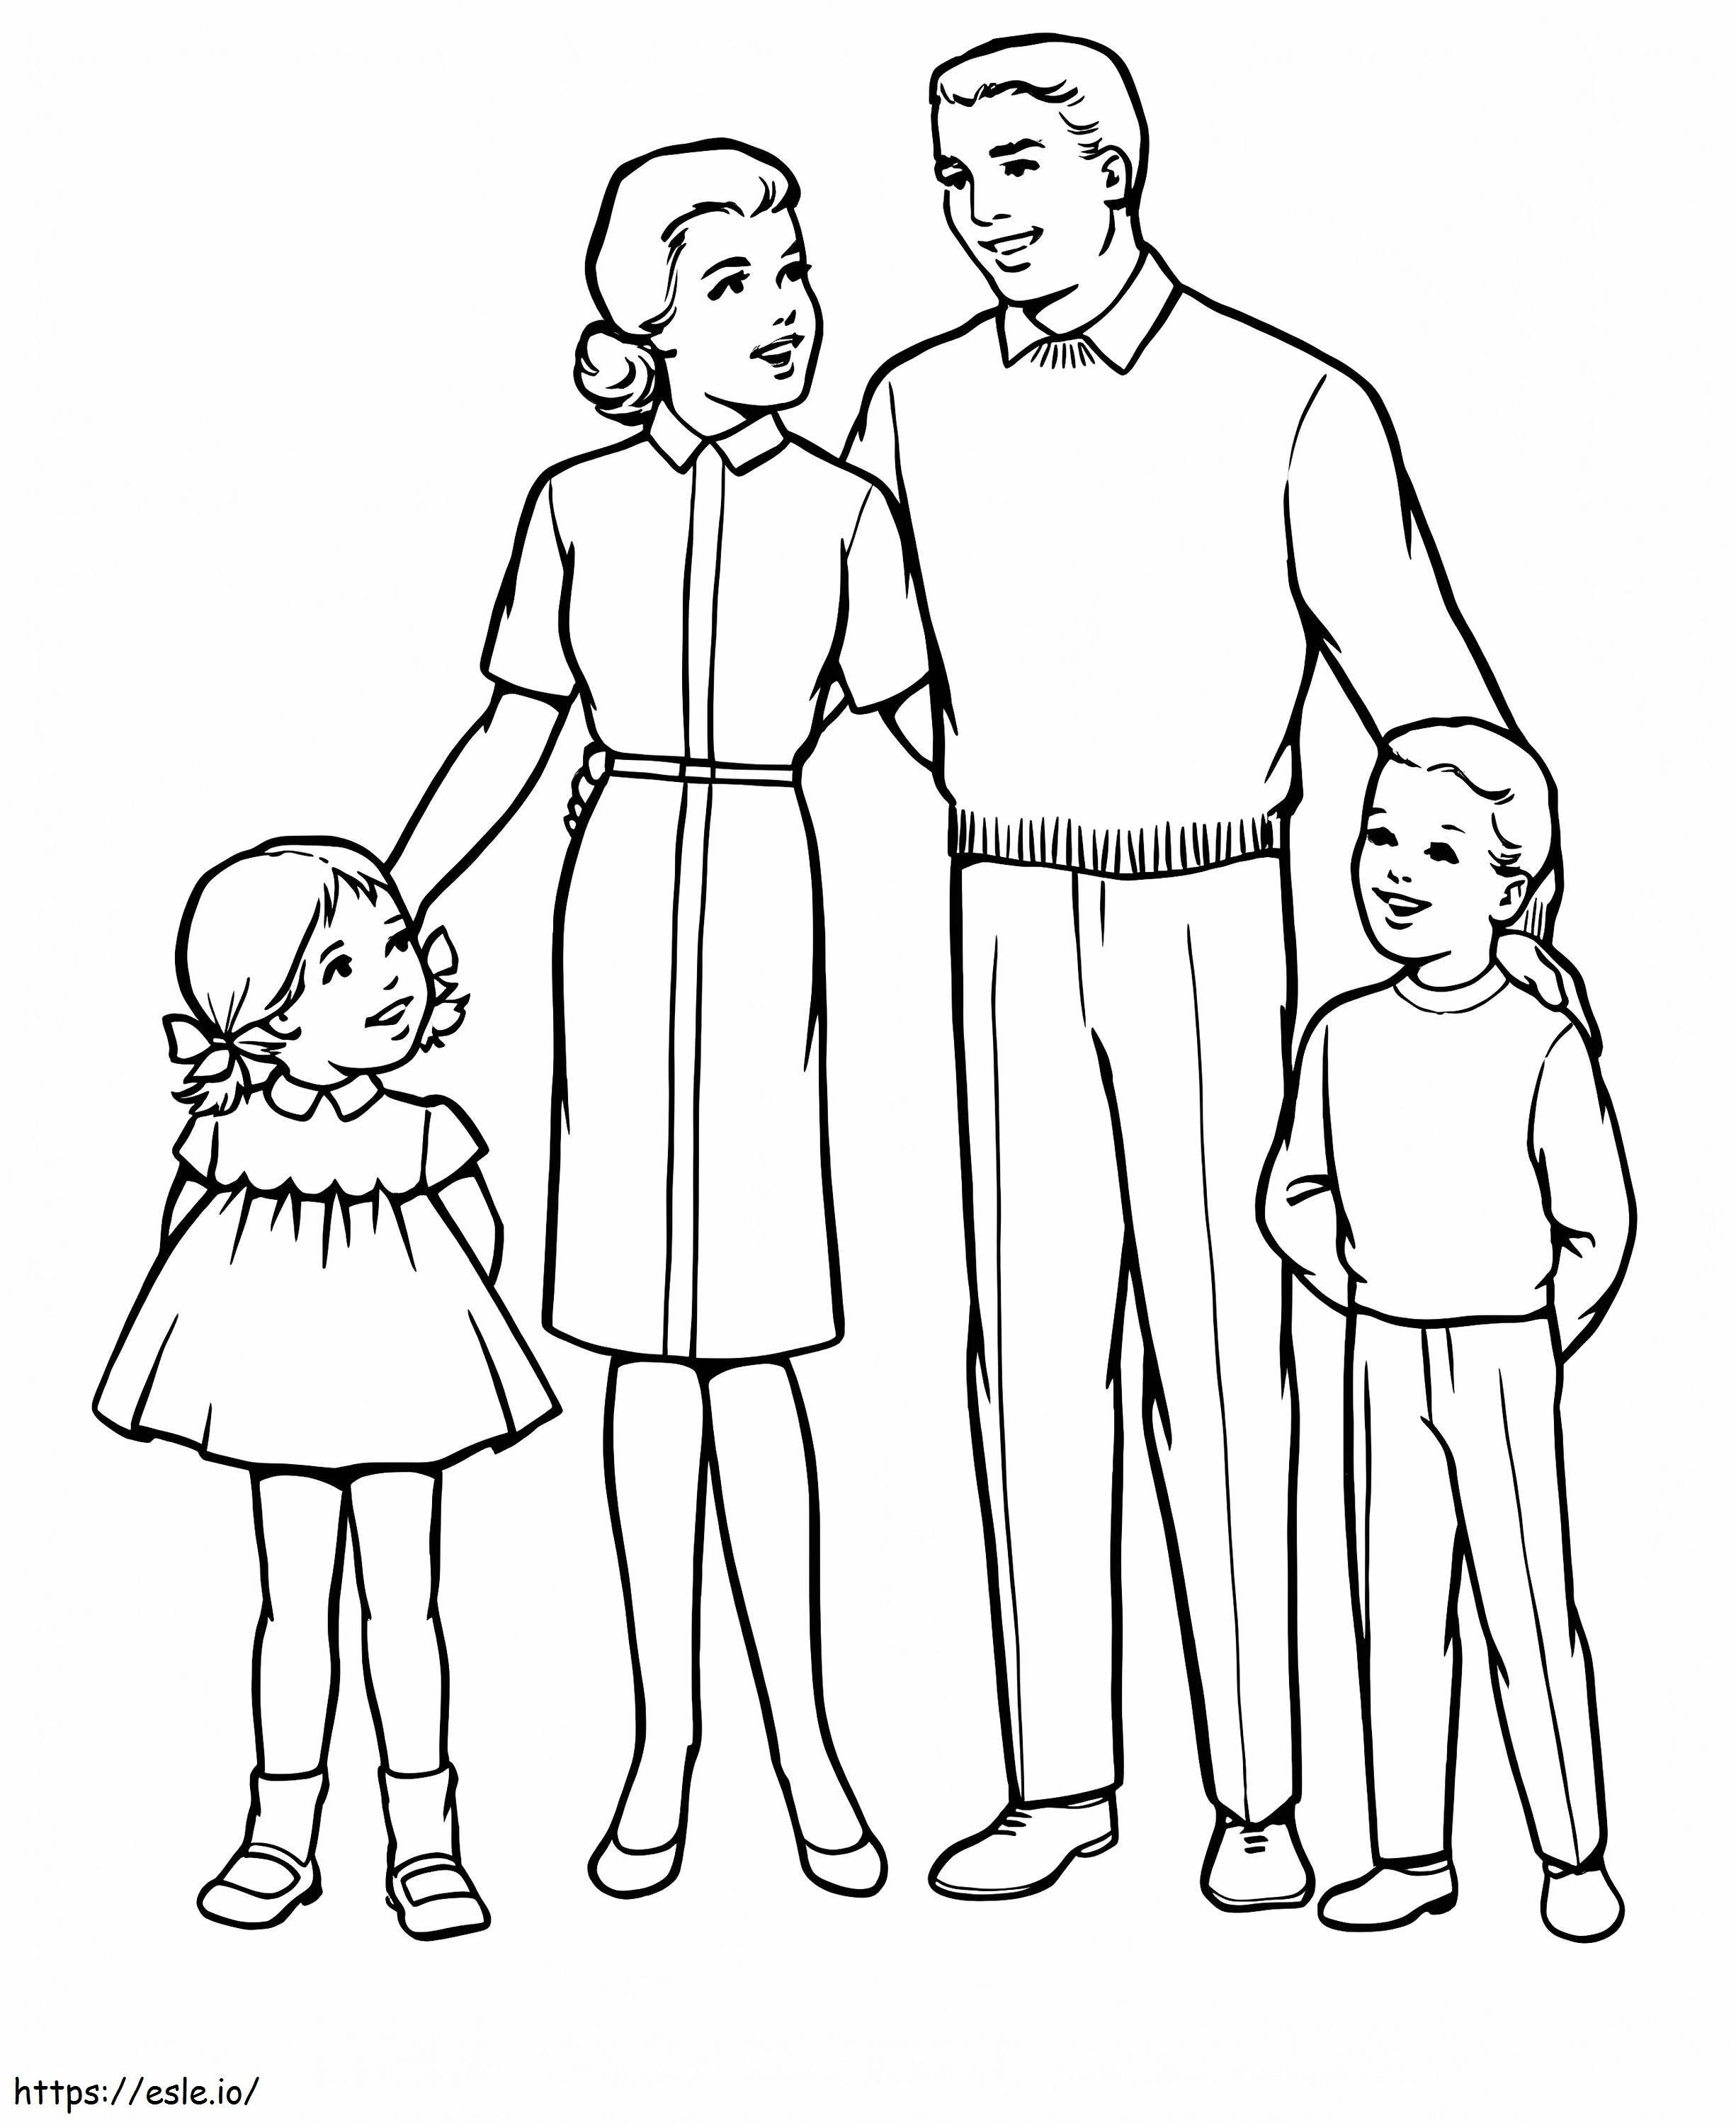 Nice Family coloring page